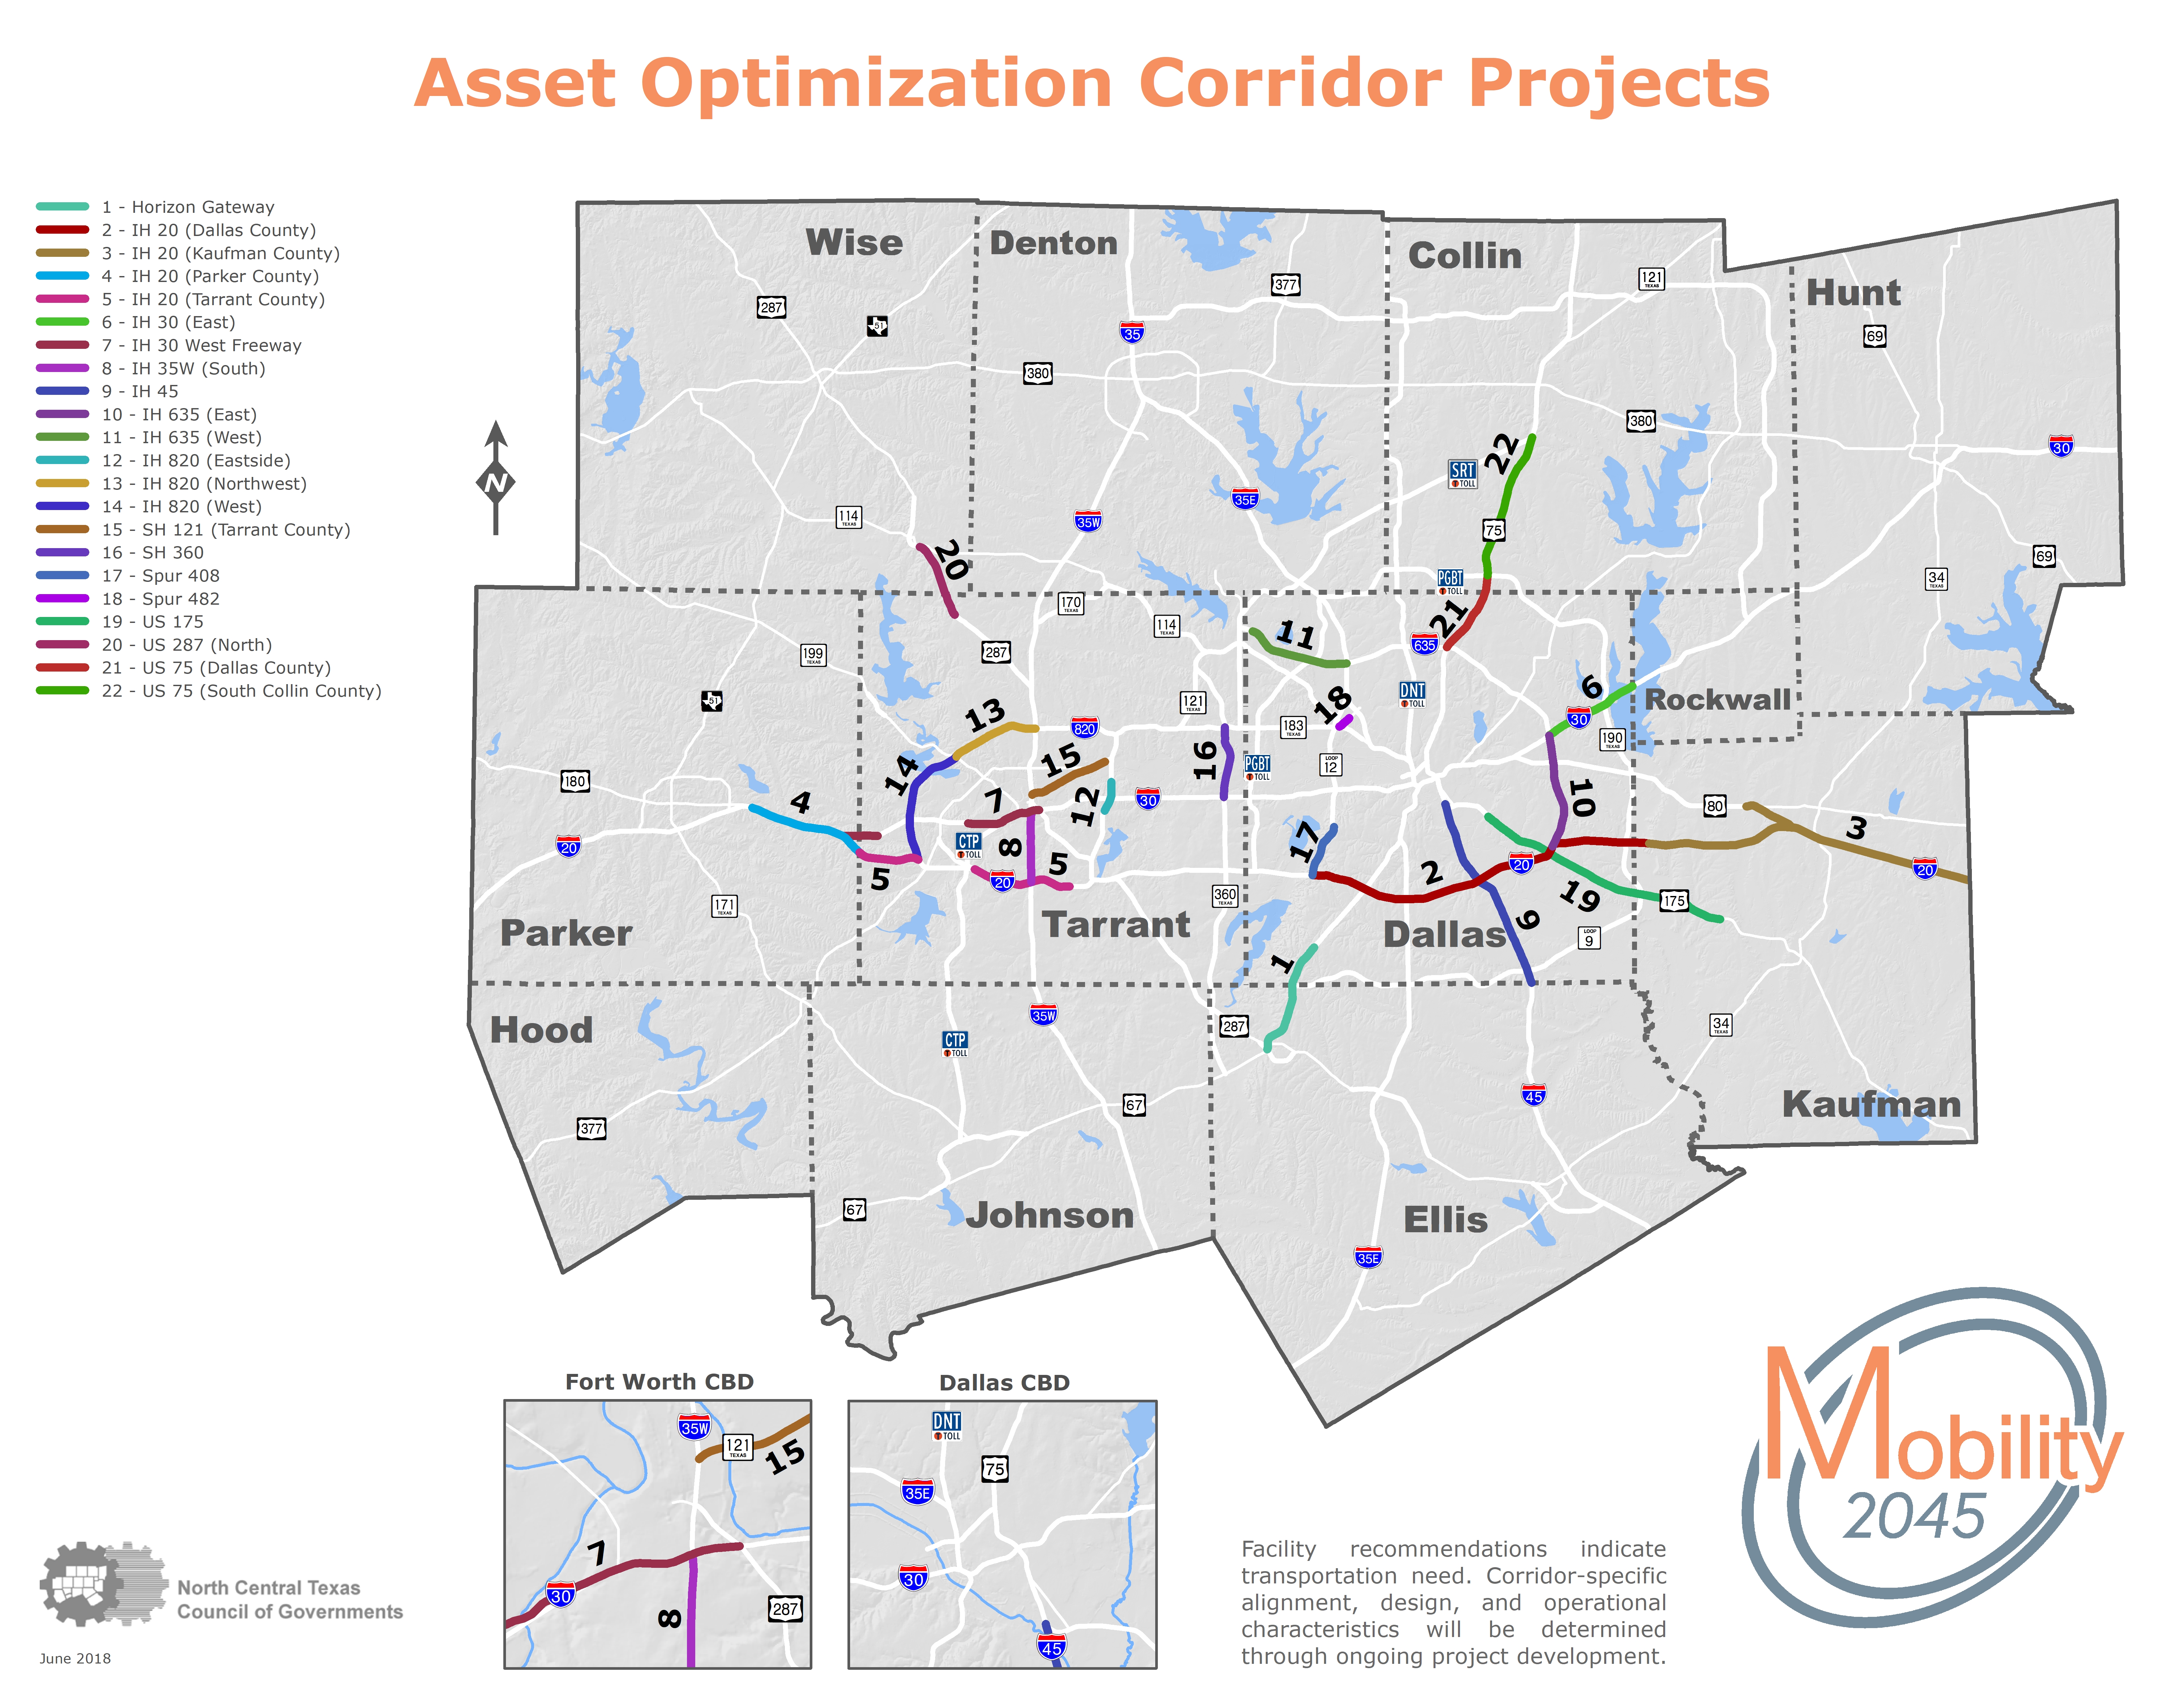 This map shows the asset optimization corridor projects and includes a table of content with the roads that will be affected by Mobility 2045